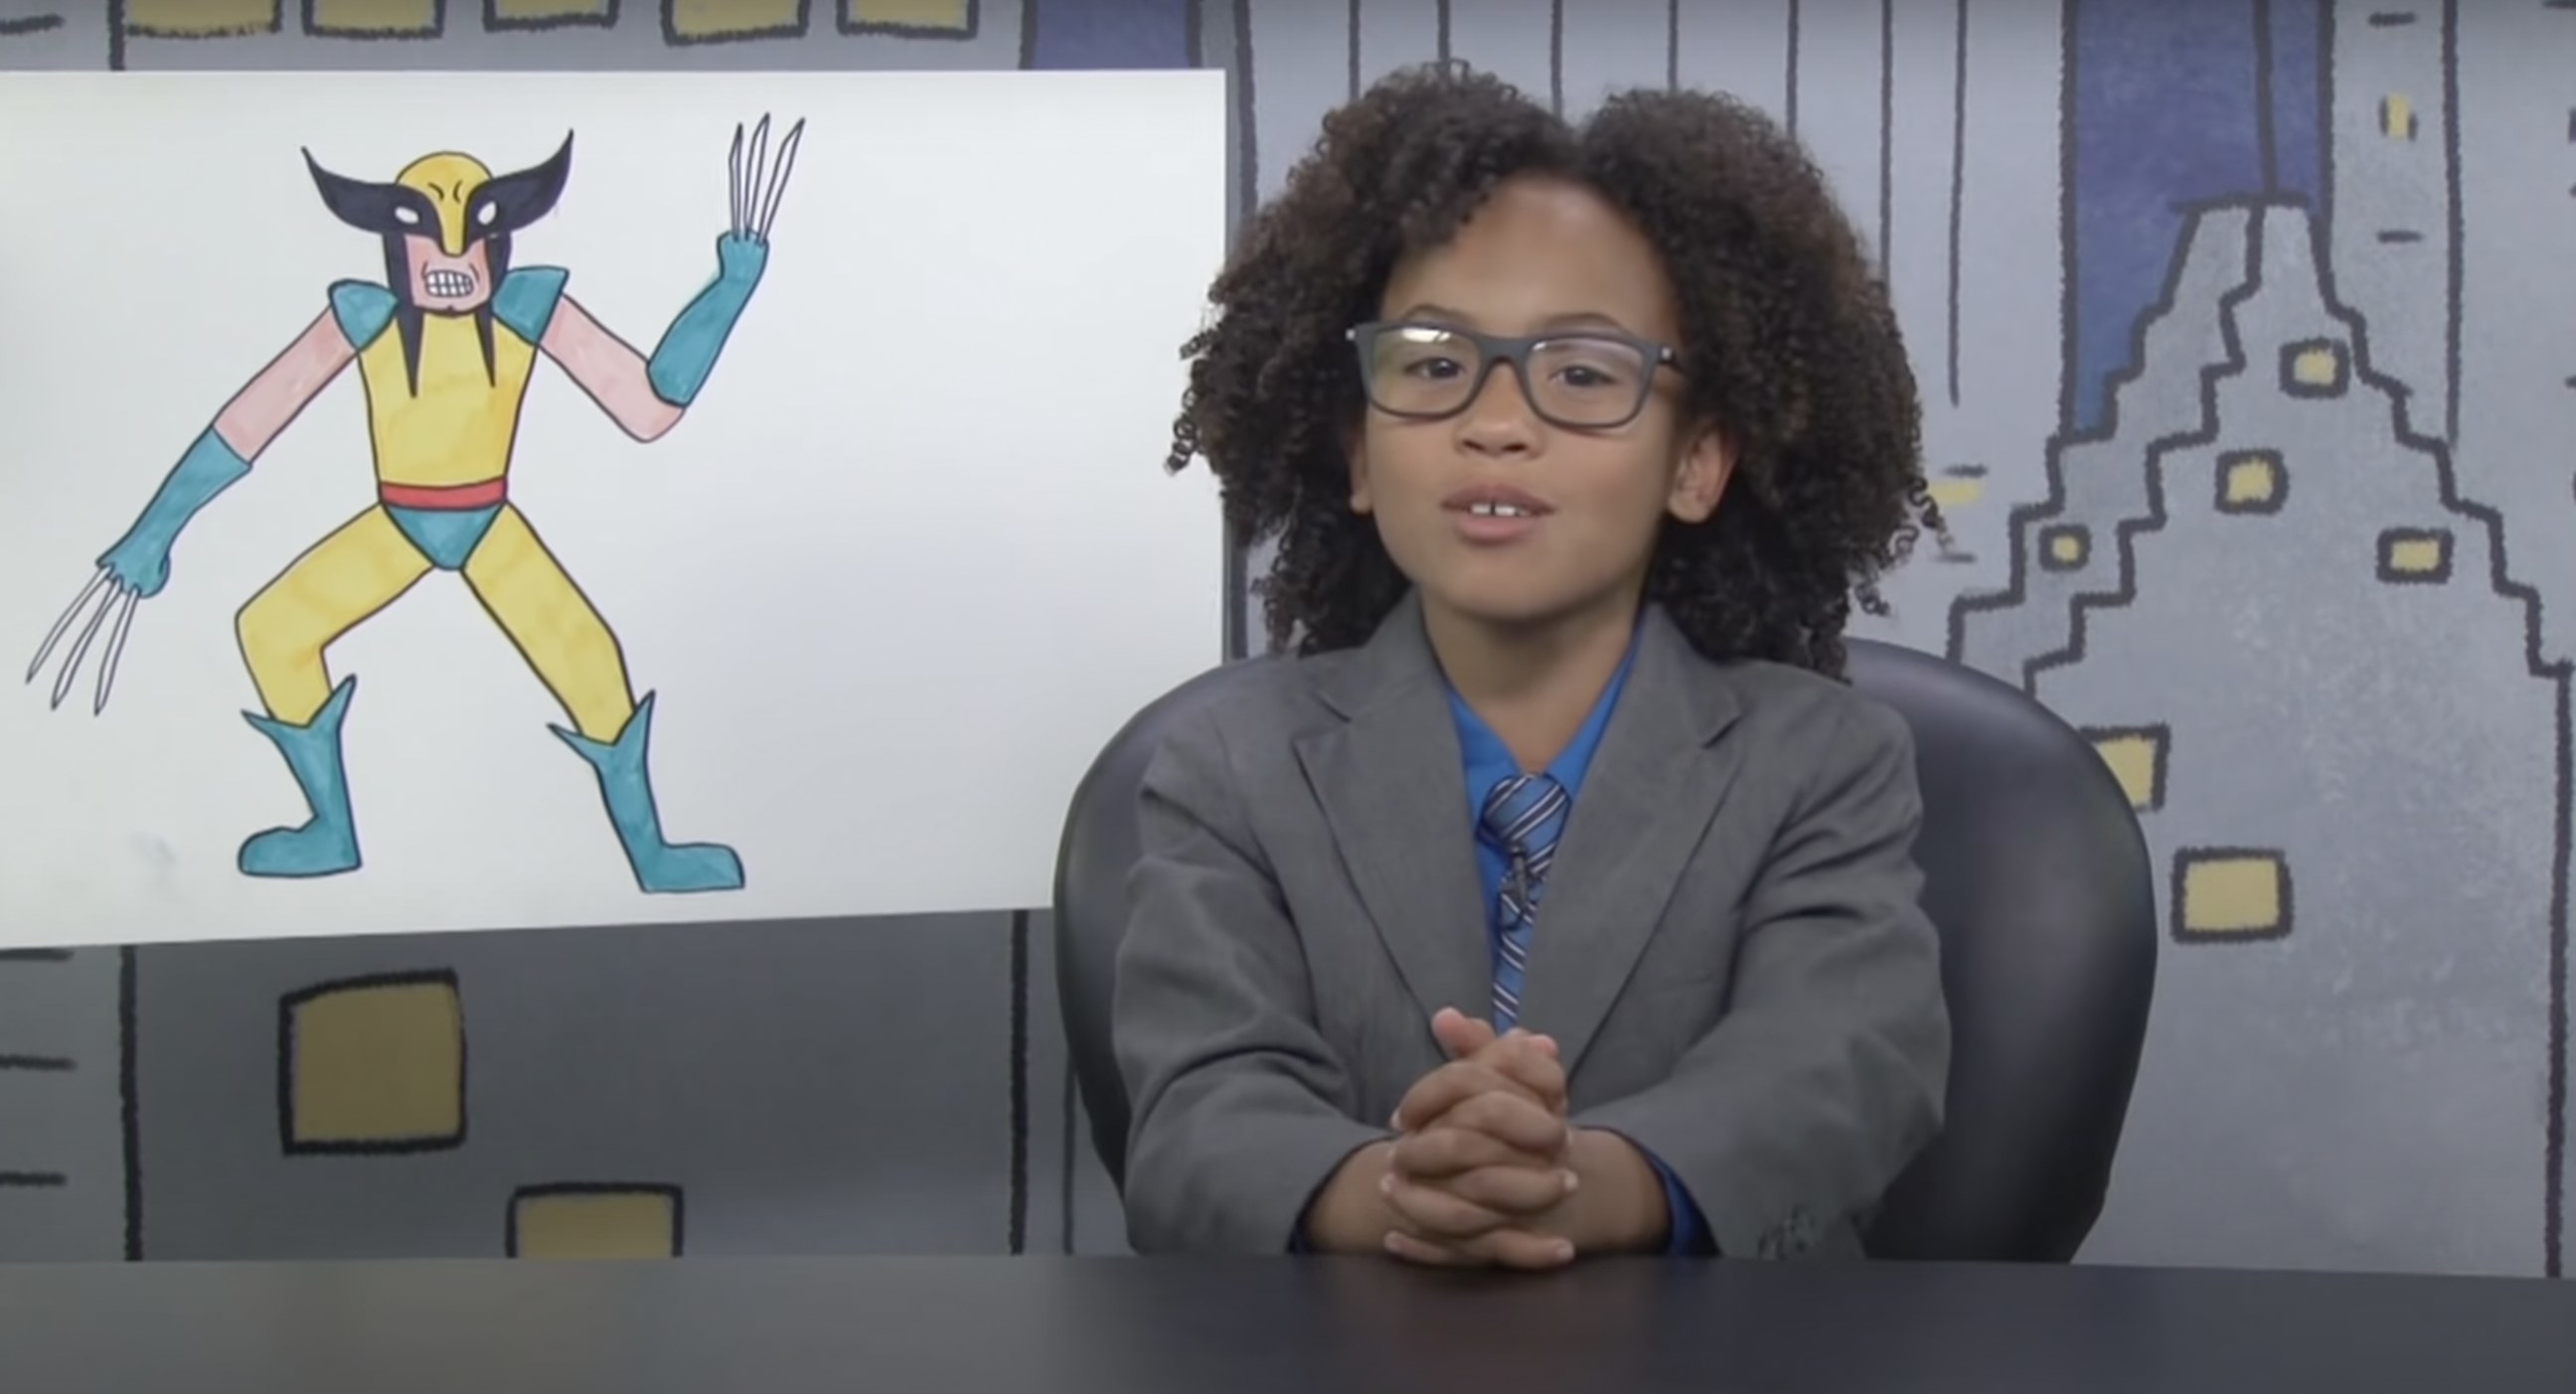 A child dressed up as John Oliver sitting at a desk with an drawing of Wolverine next to them